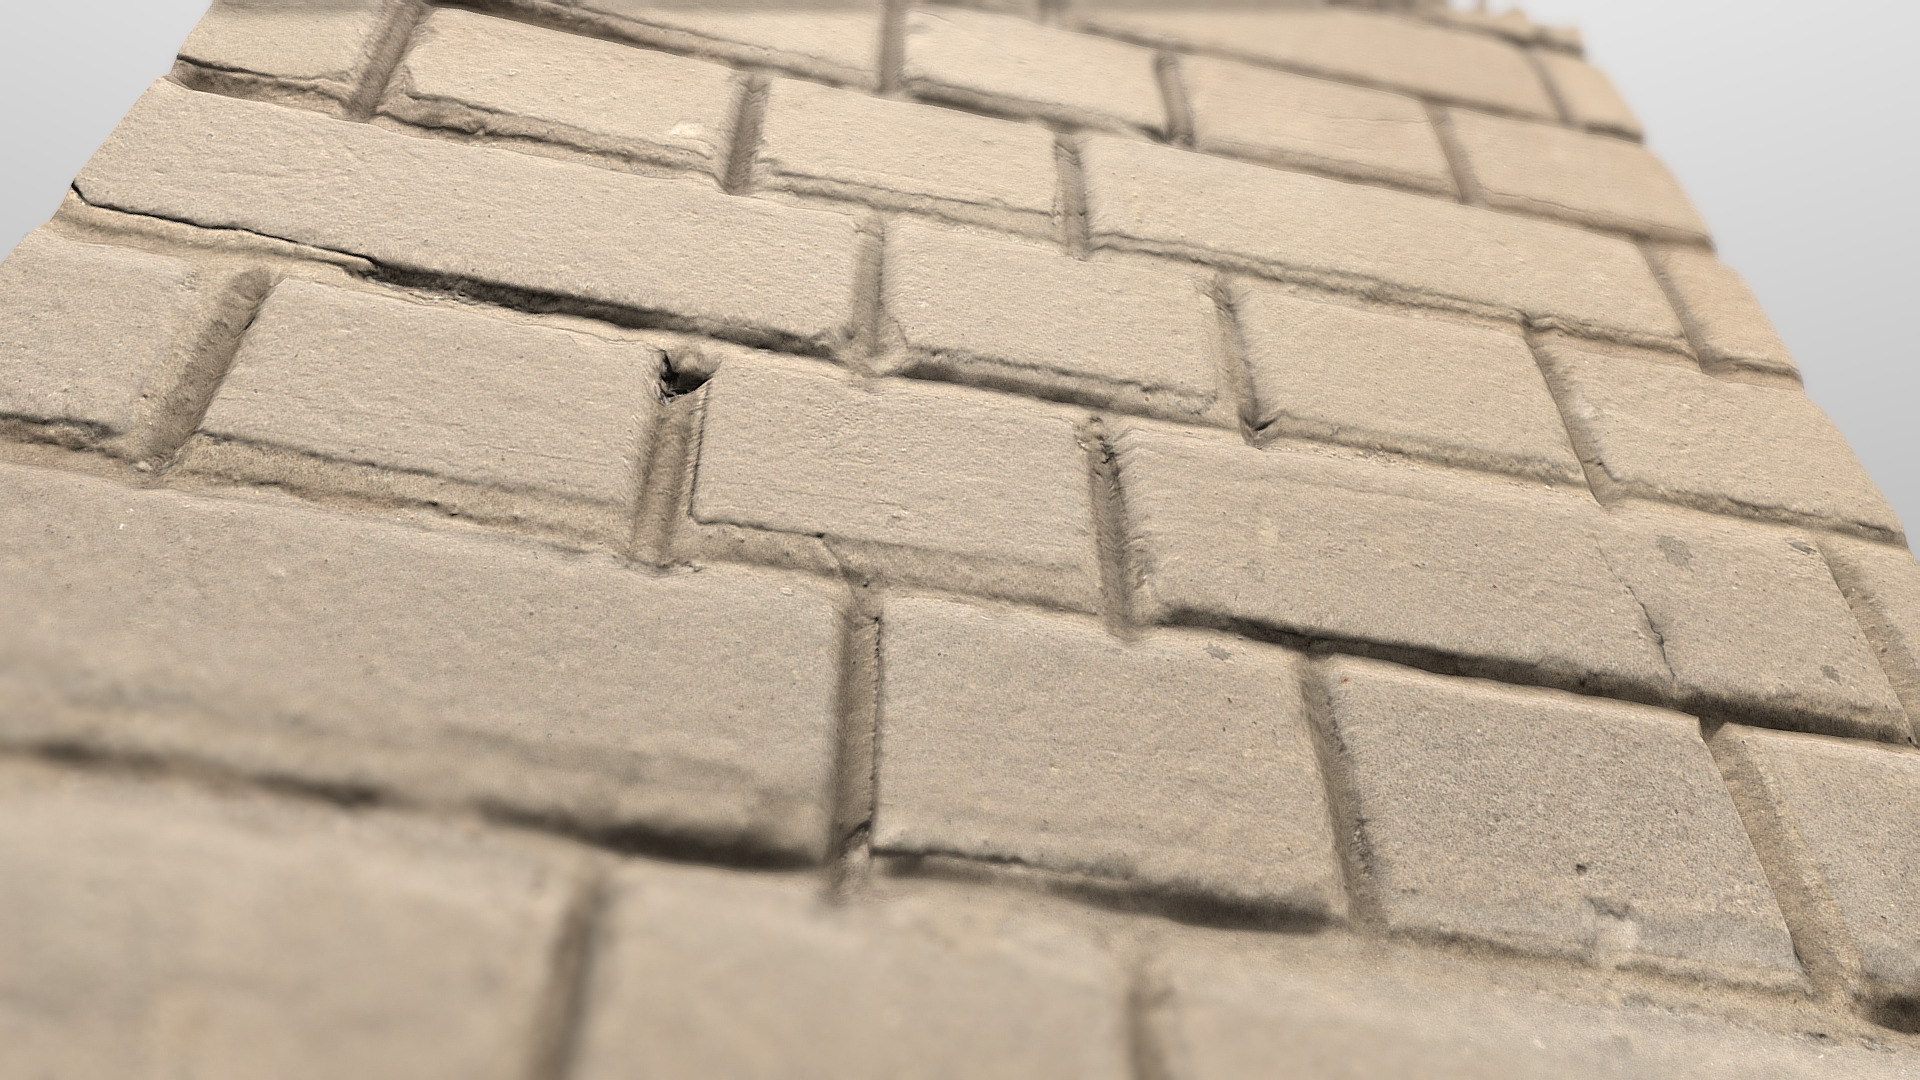 3D model PBR Texture scan – BRICKS - This is a 3D model of the PBR Texture scan - BRICKS. The 3D model is about a close-up of a roof.